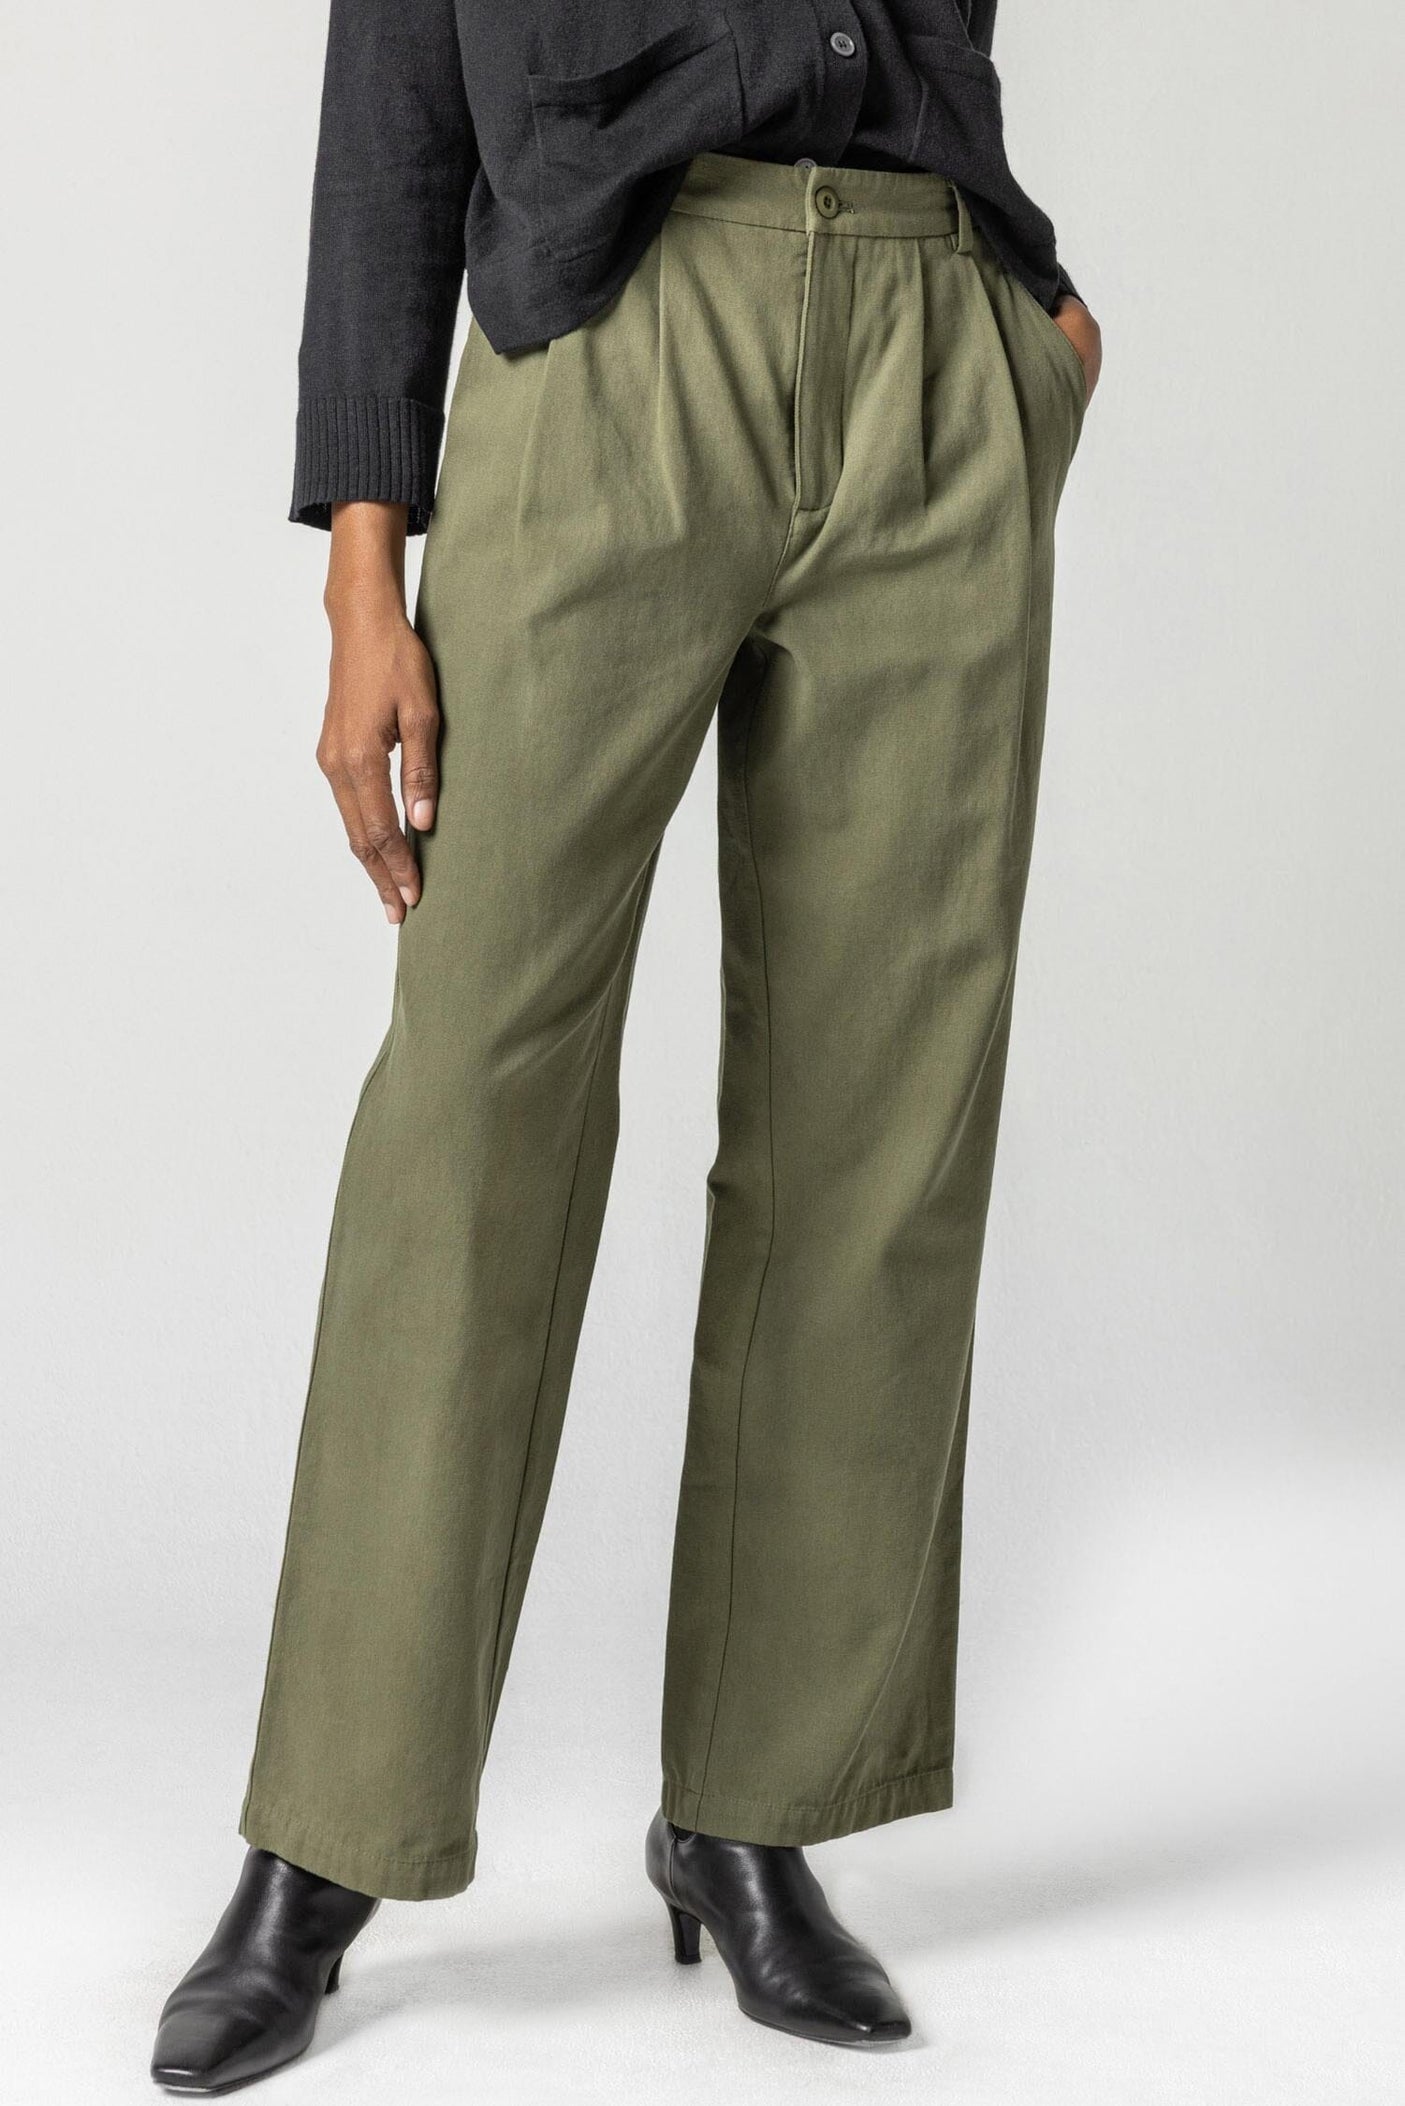 New Look loose fit pleated smart trousers in grey windowpane check | ASOS